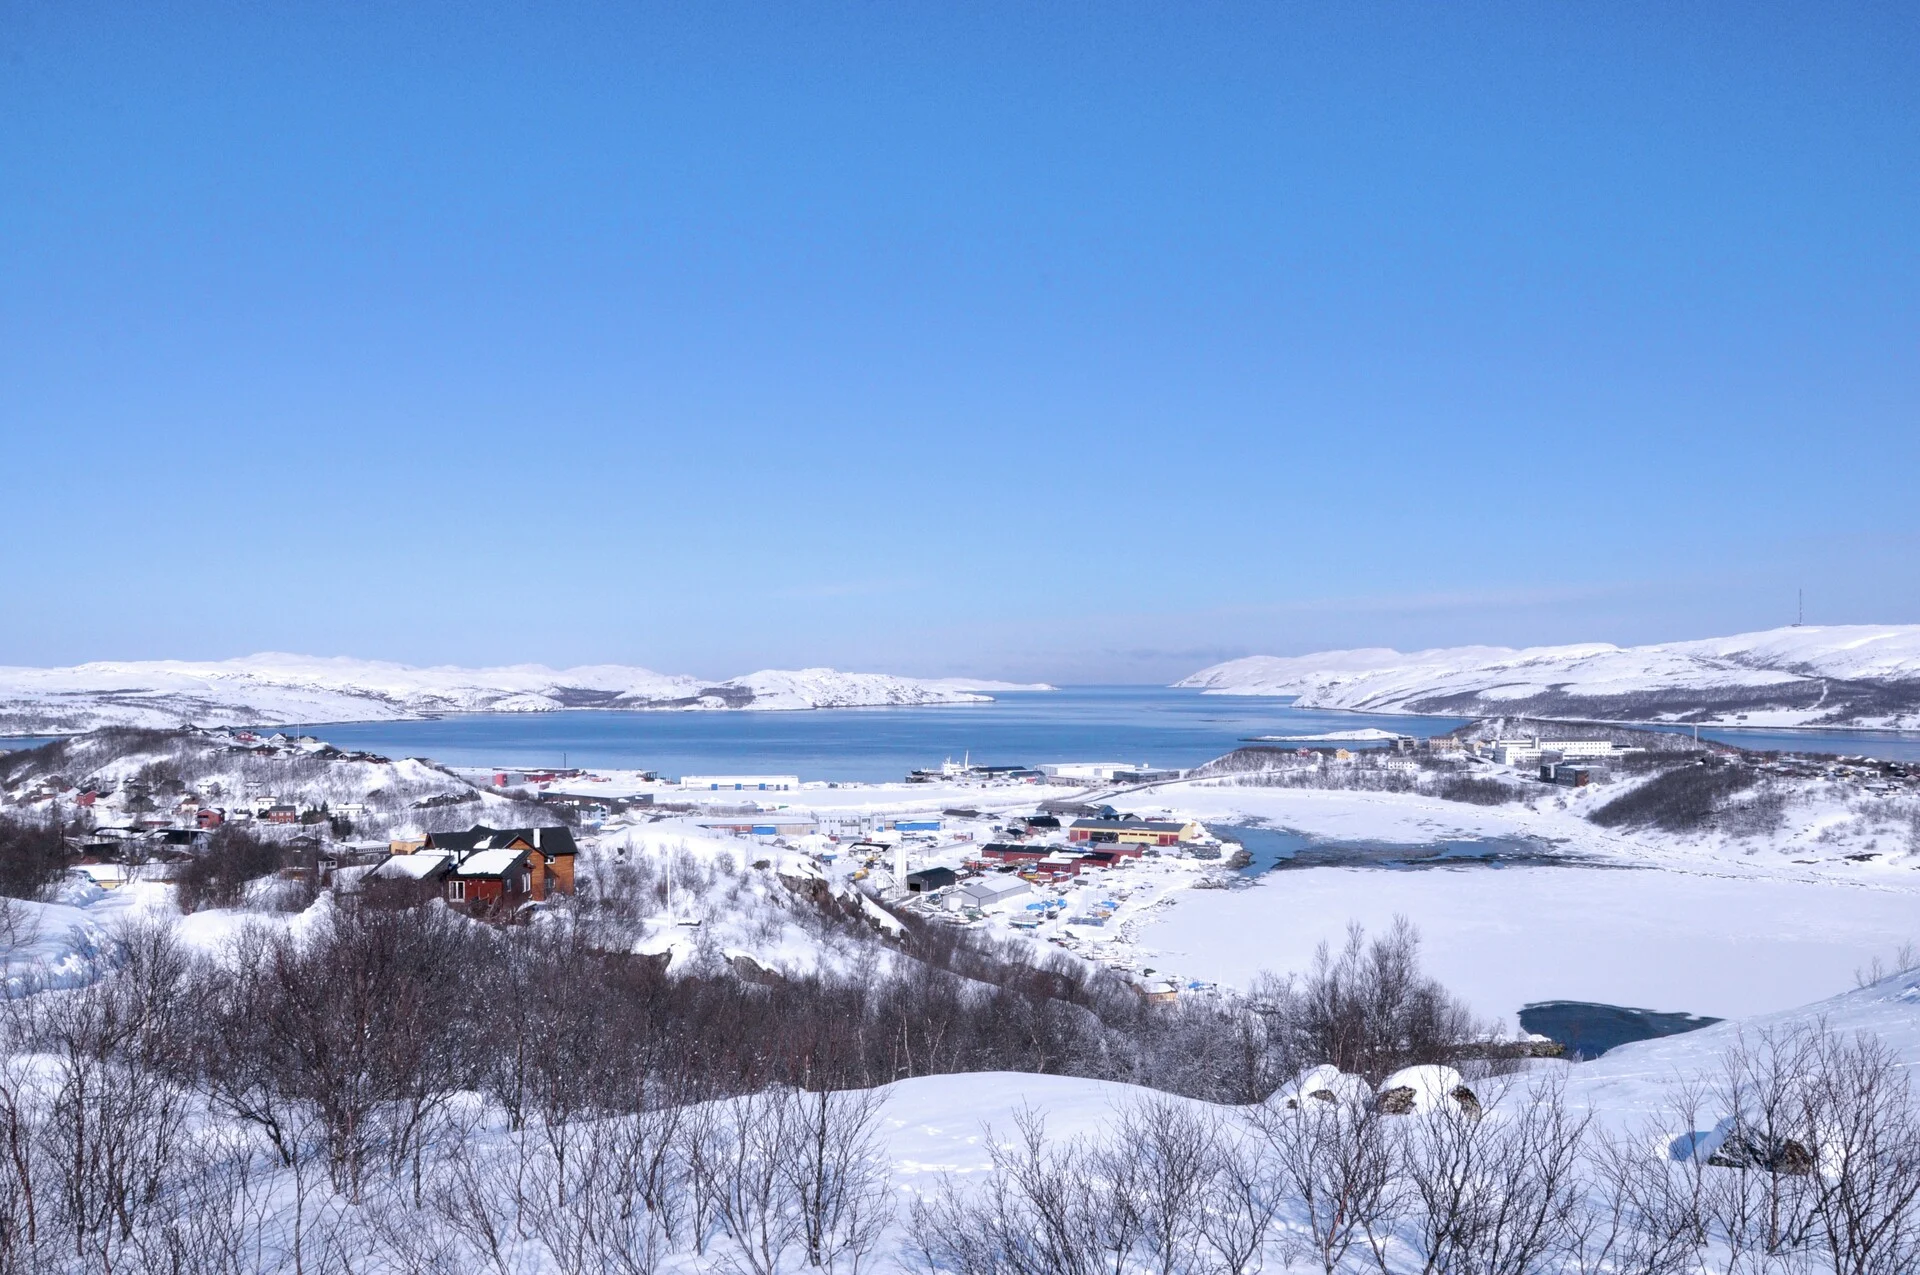 The Russian border town of Kirkenes under a blanket of snow